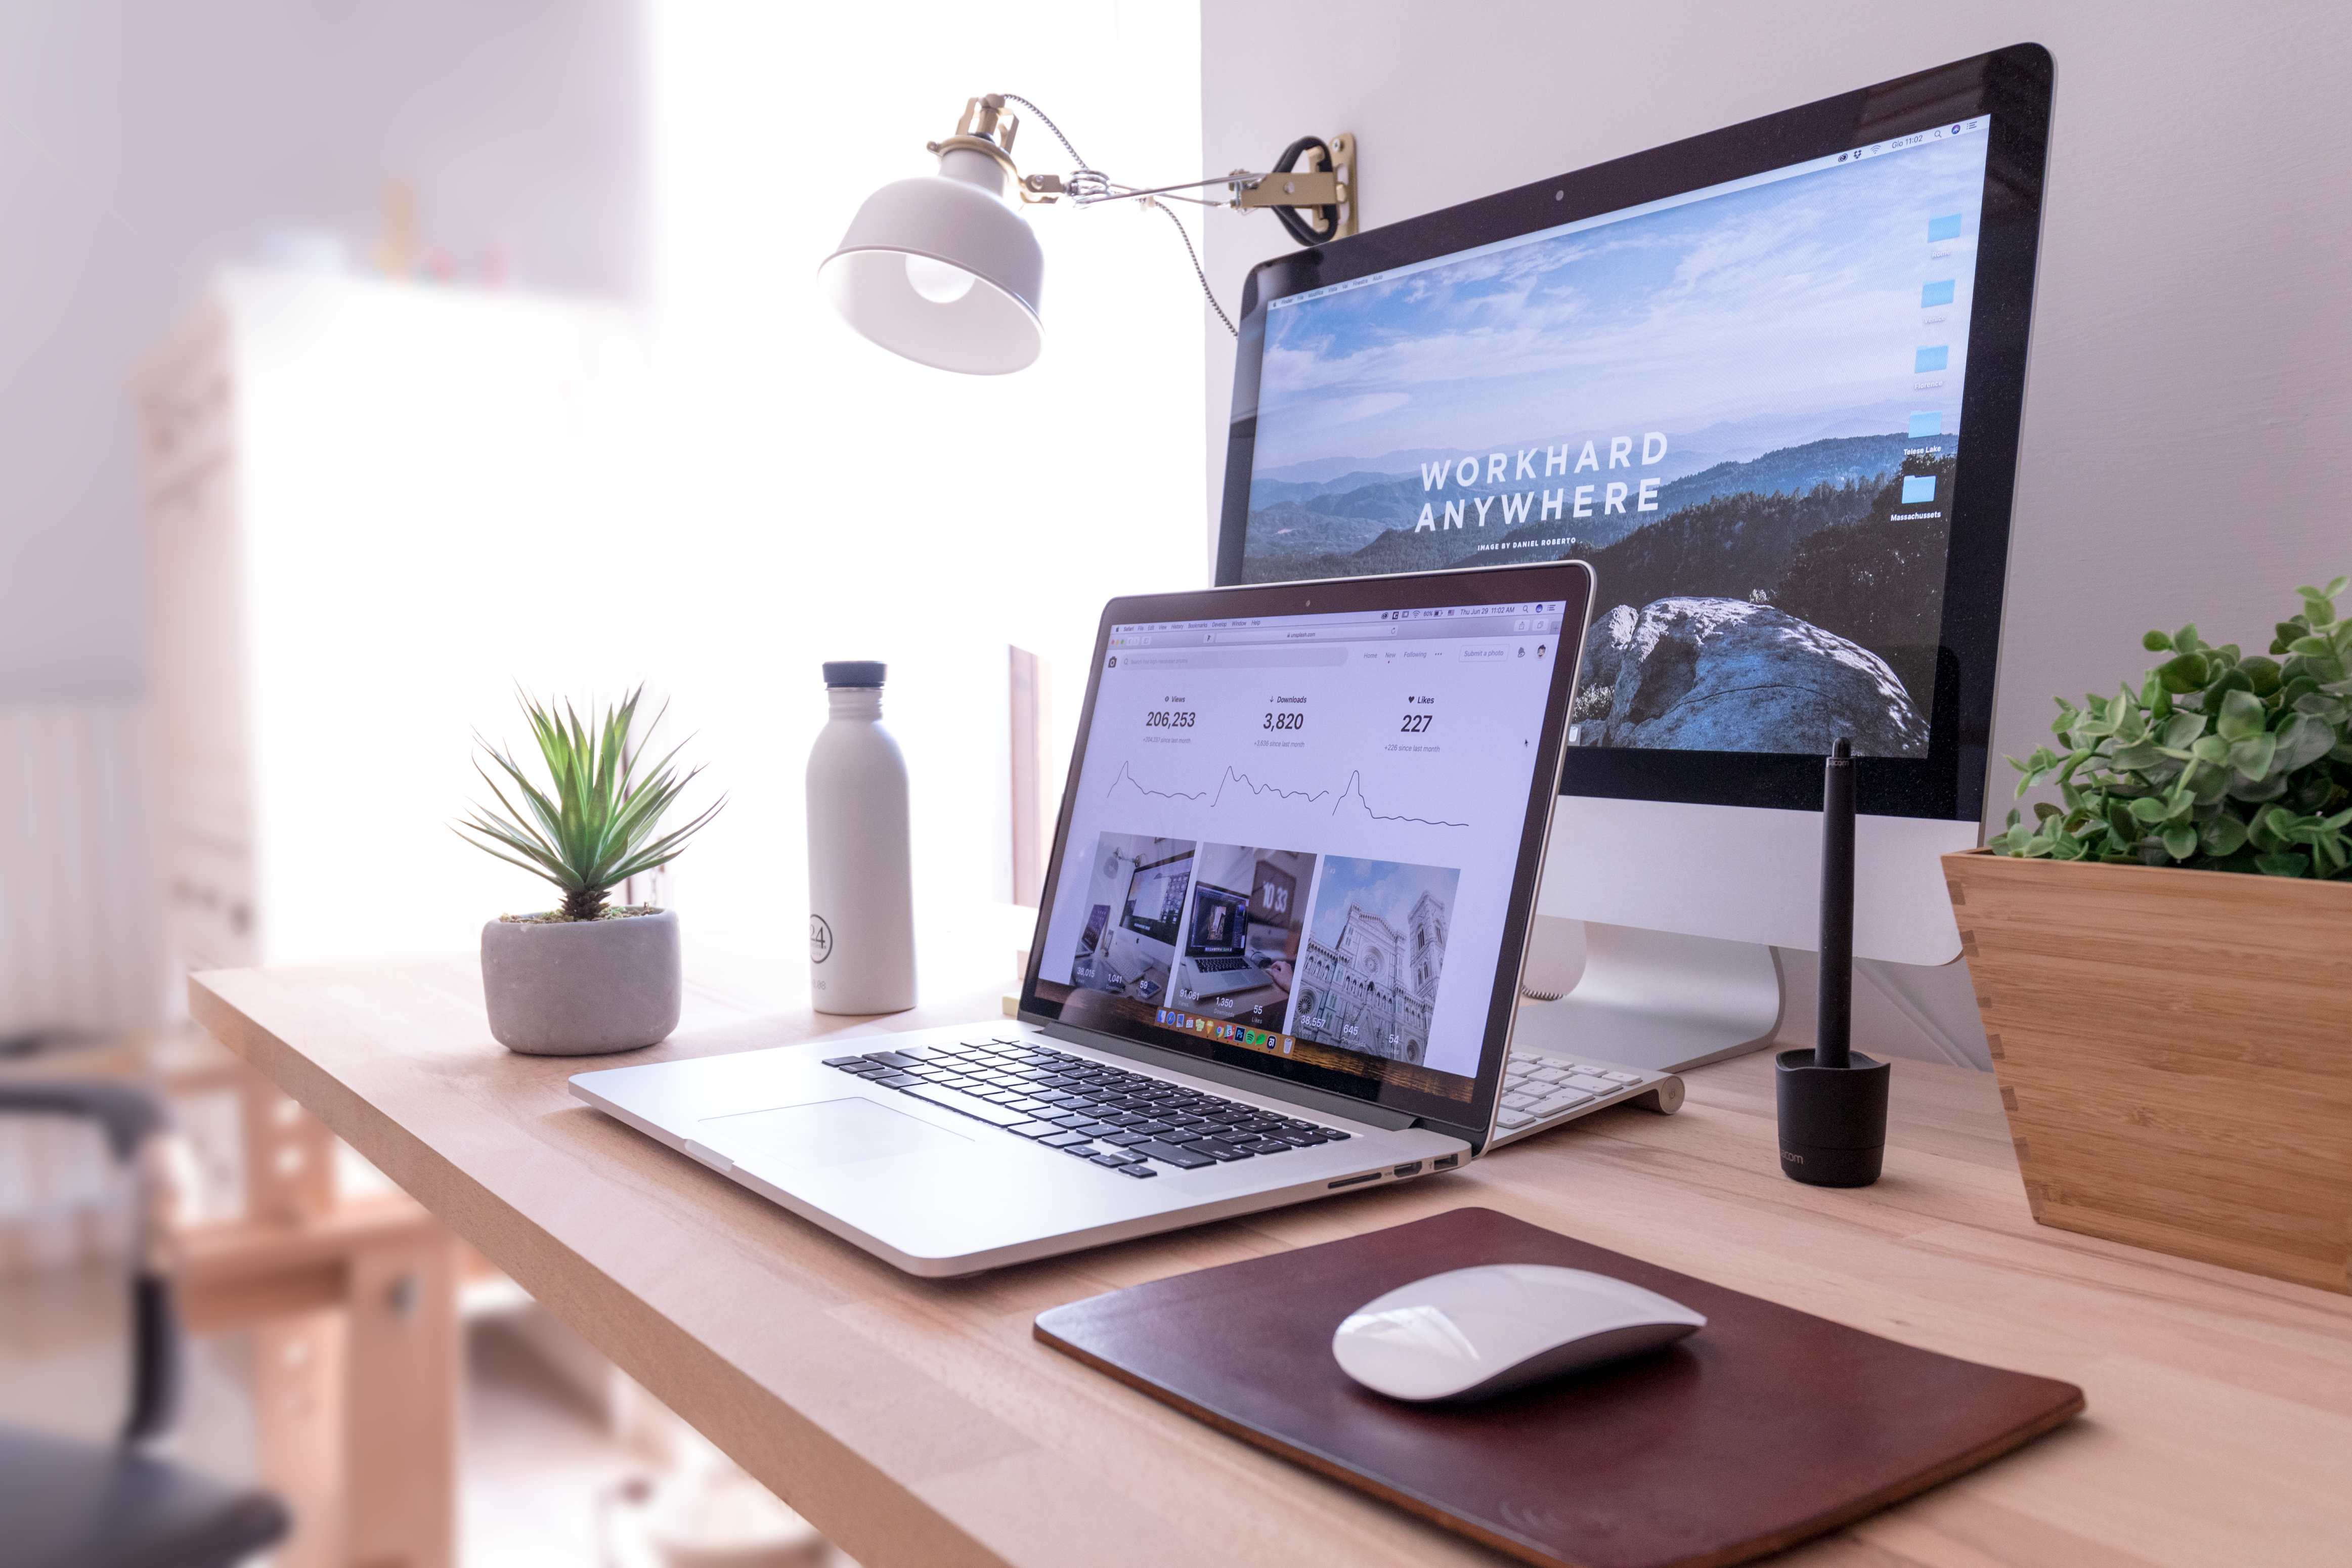 More Workspaces Inspiration hand-picked from Unsplash